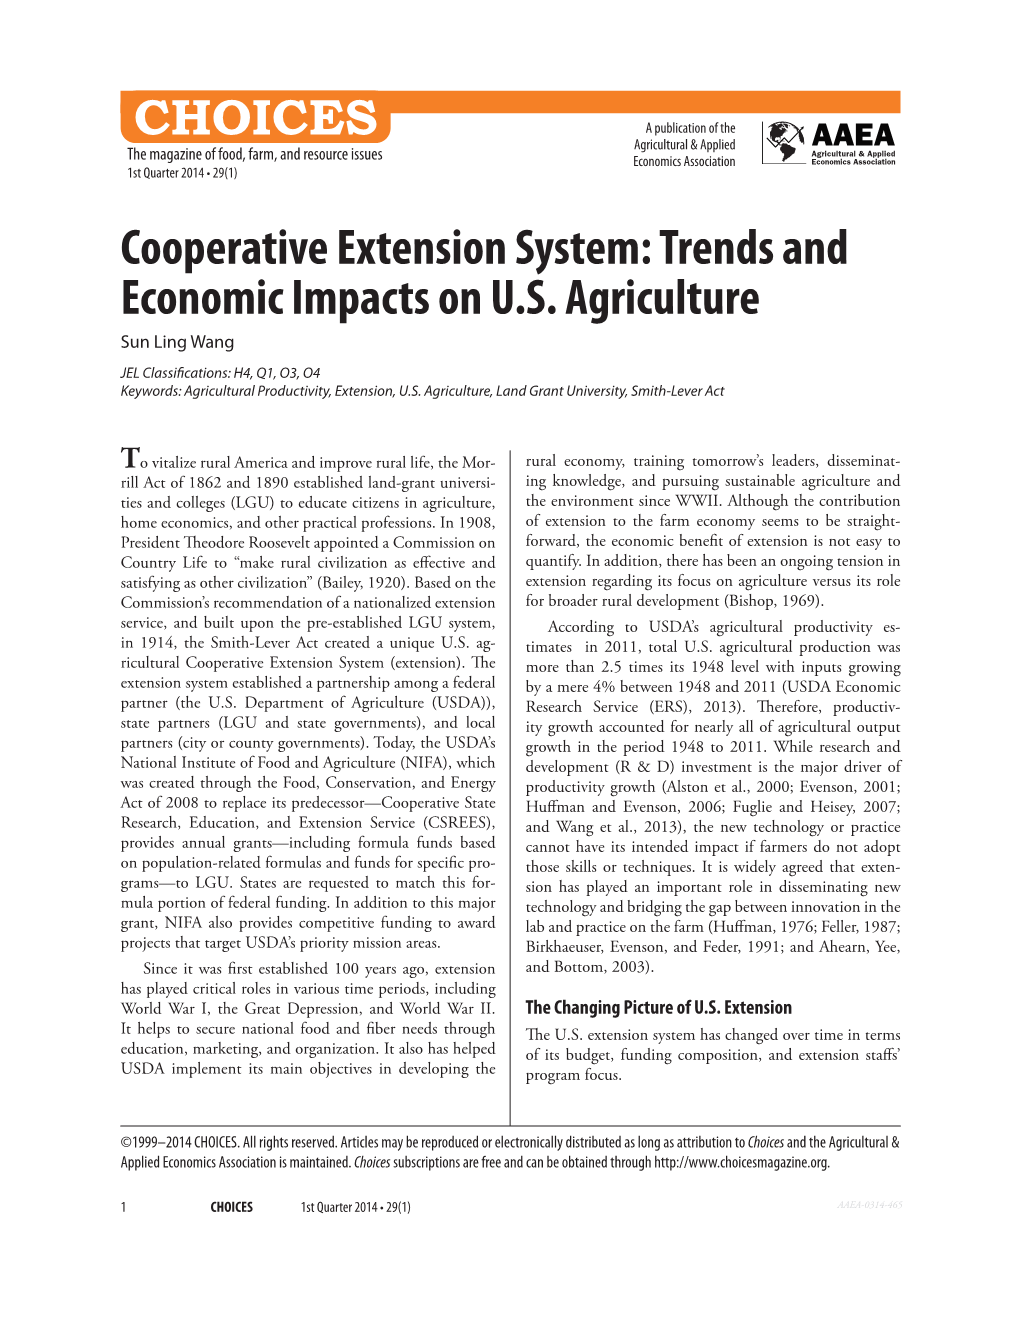 Cooperative Extension System: Trends and Economic Impacts on U.S